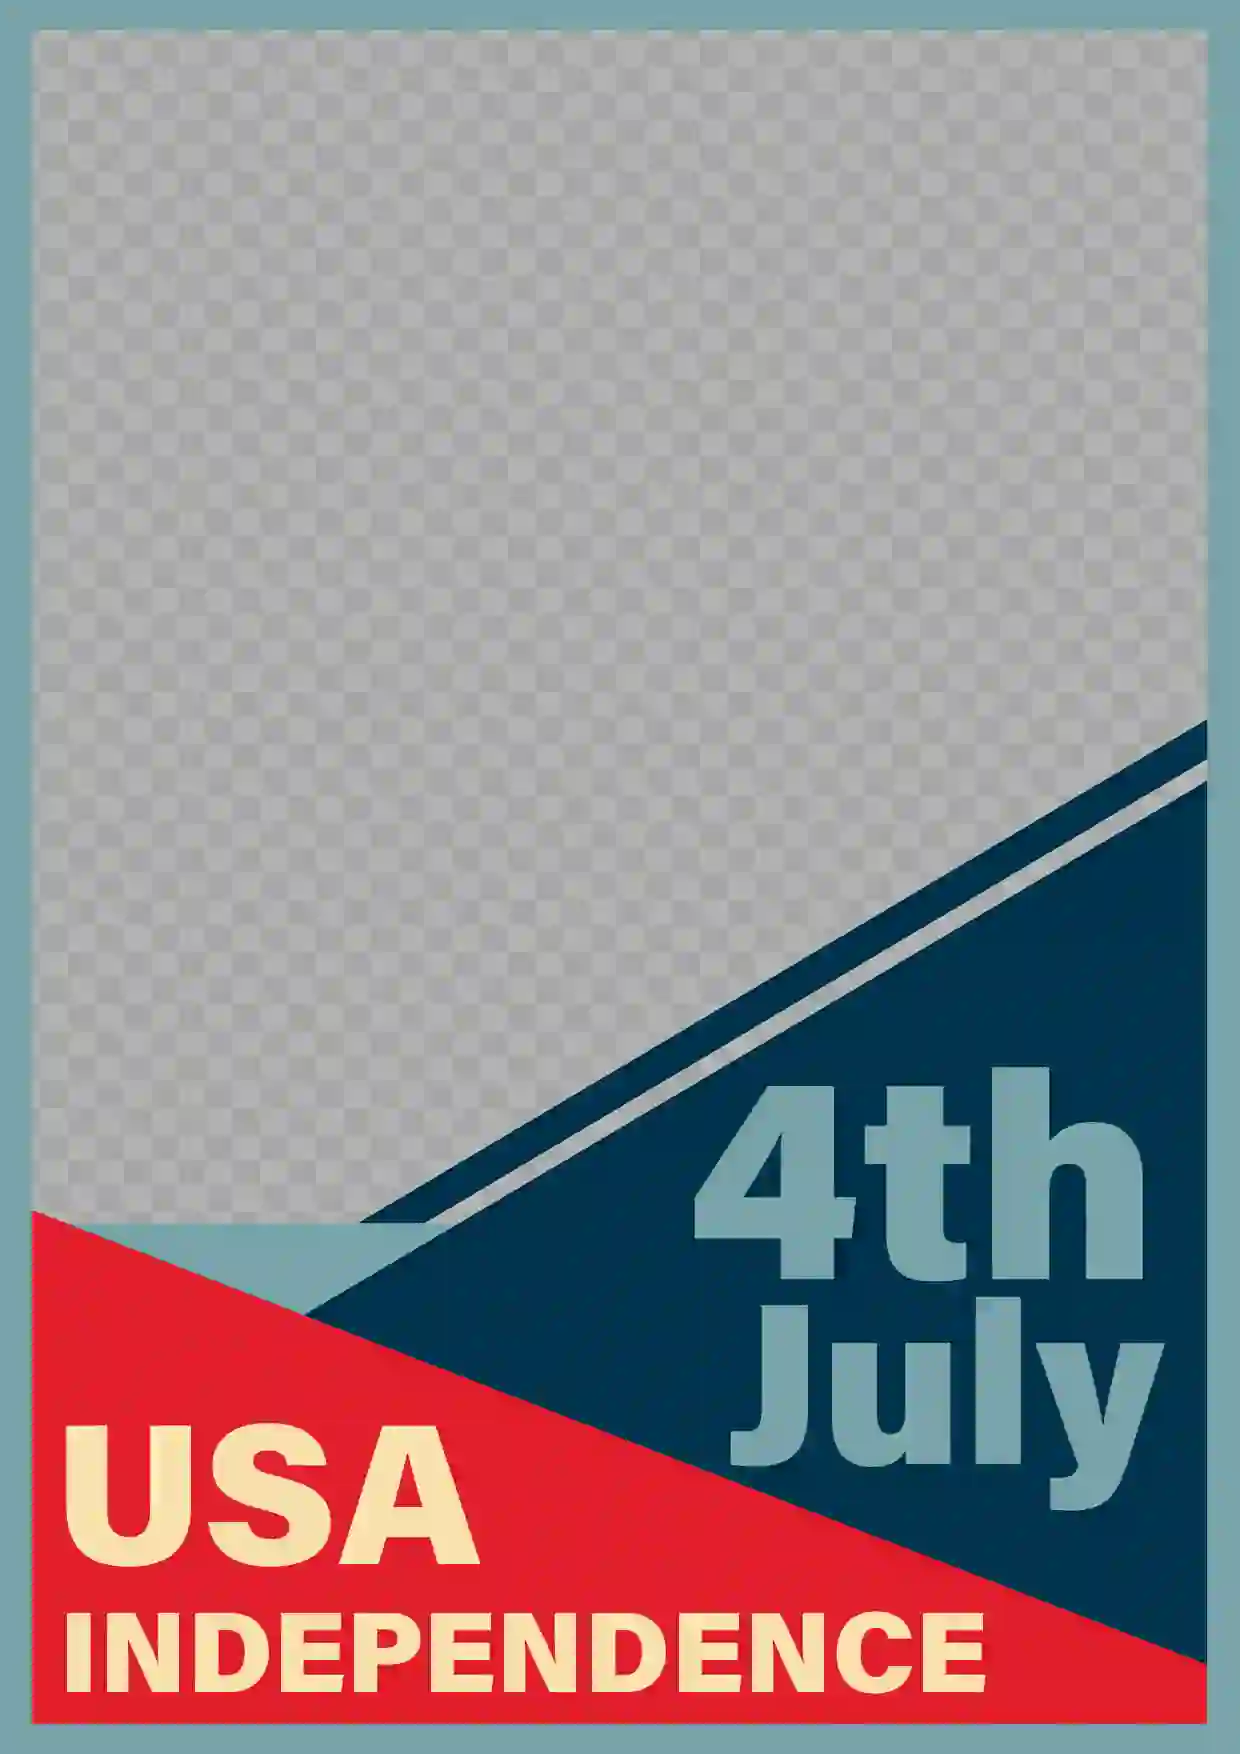 USA Independence Day Poster 4th July PSD Free Download